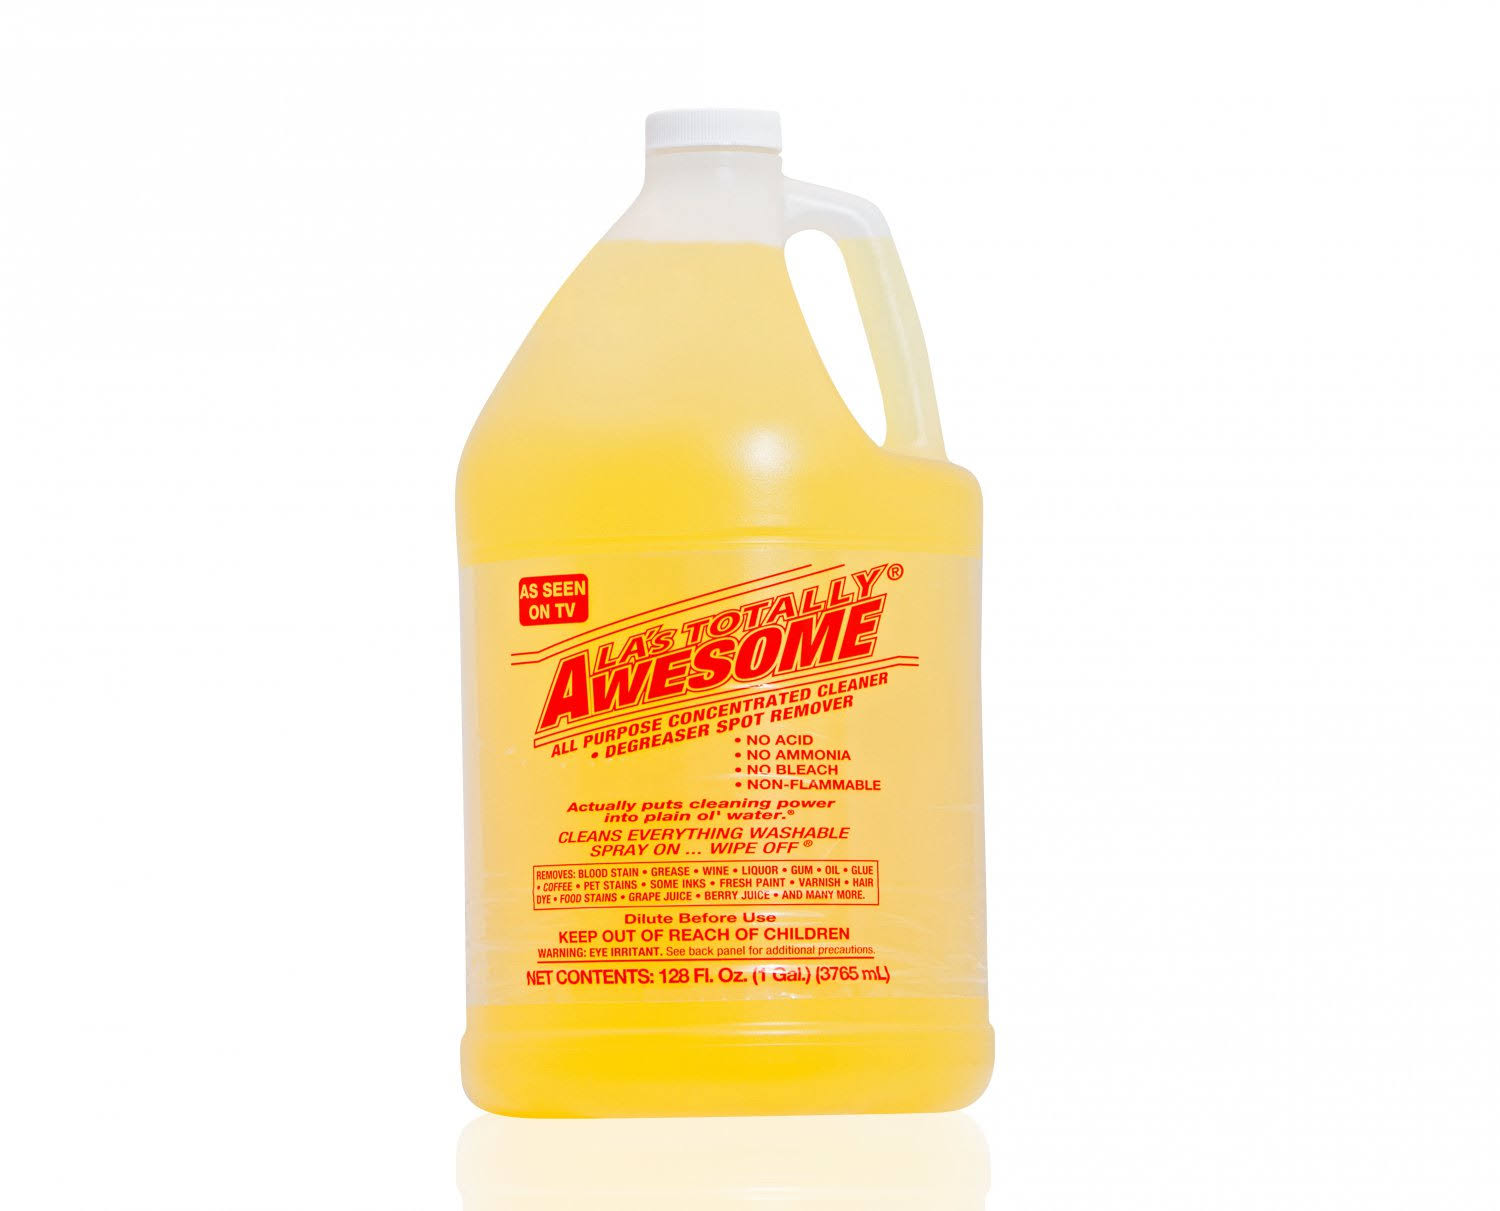 La's Totally Awesome All Purpose Concentrated Cleaner Septic Safe - 64oz